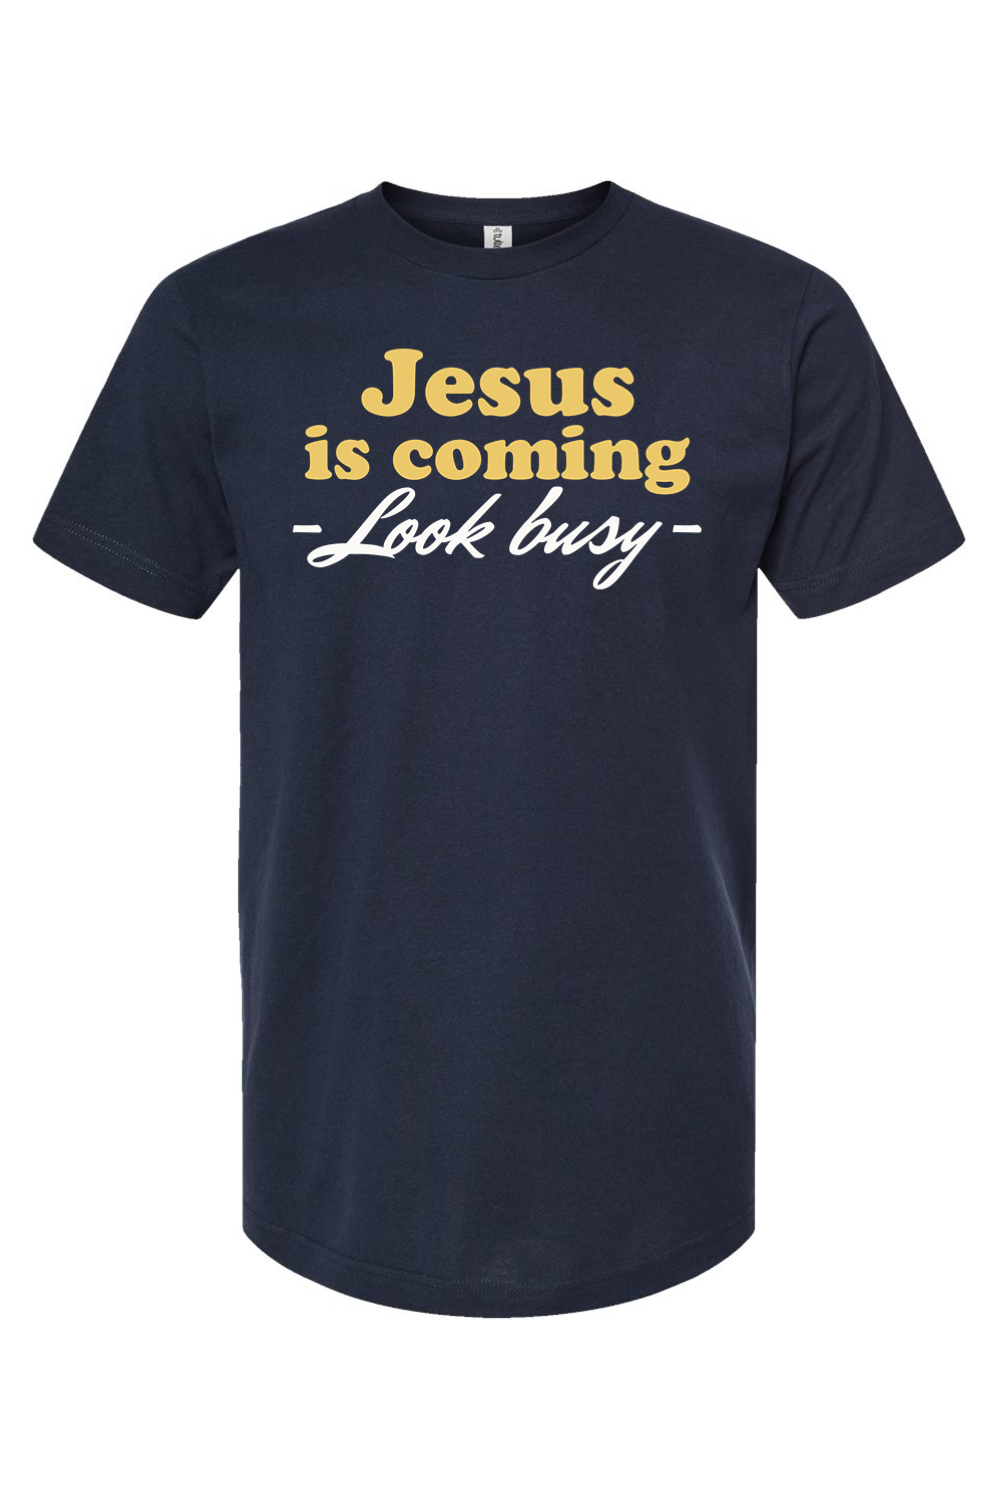 Jesus is Coming - Look Busy - T-Shirt